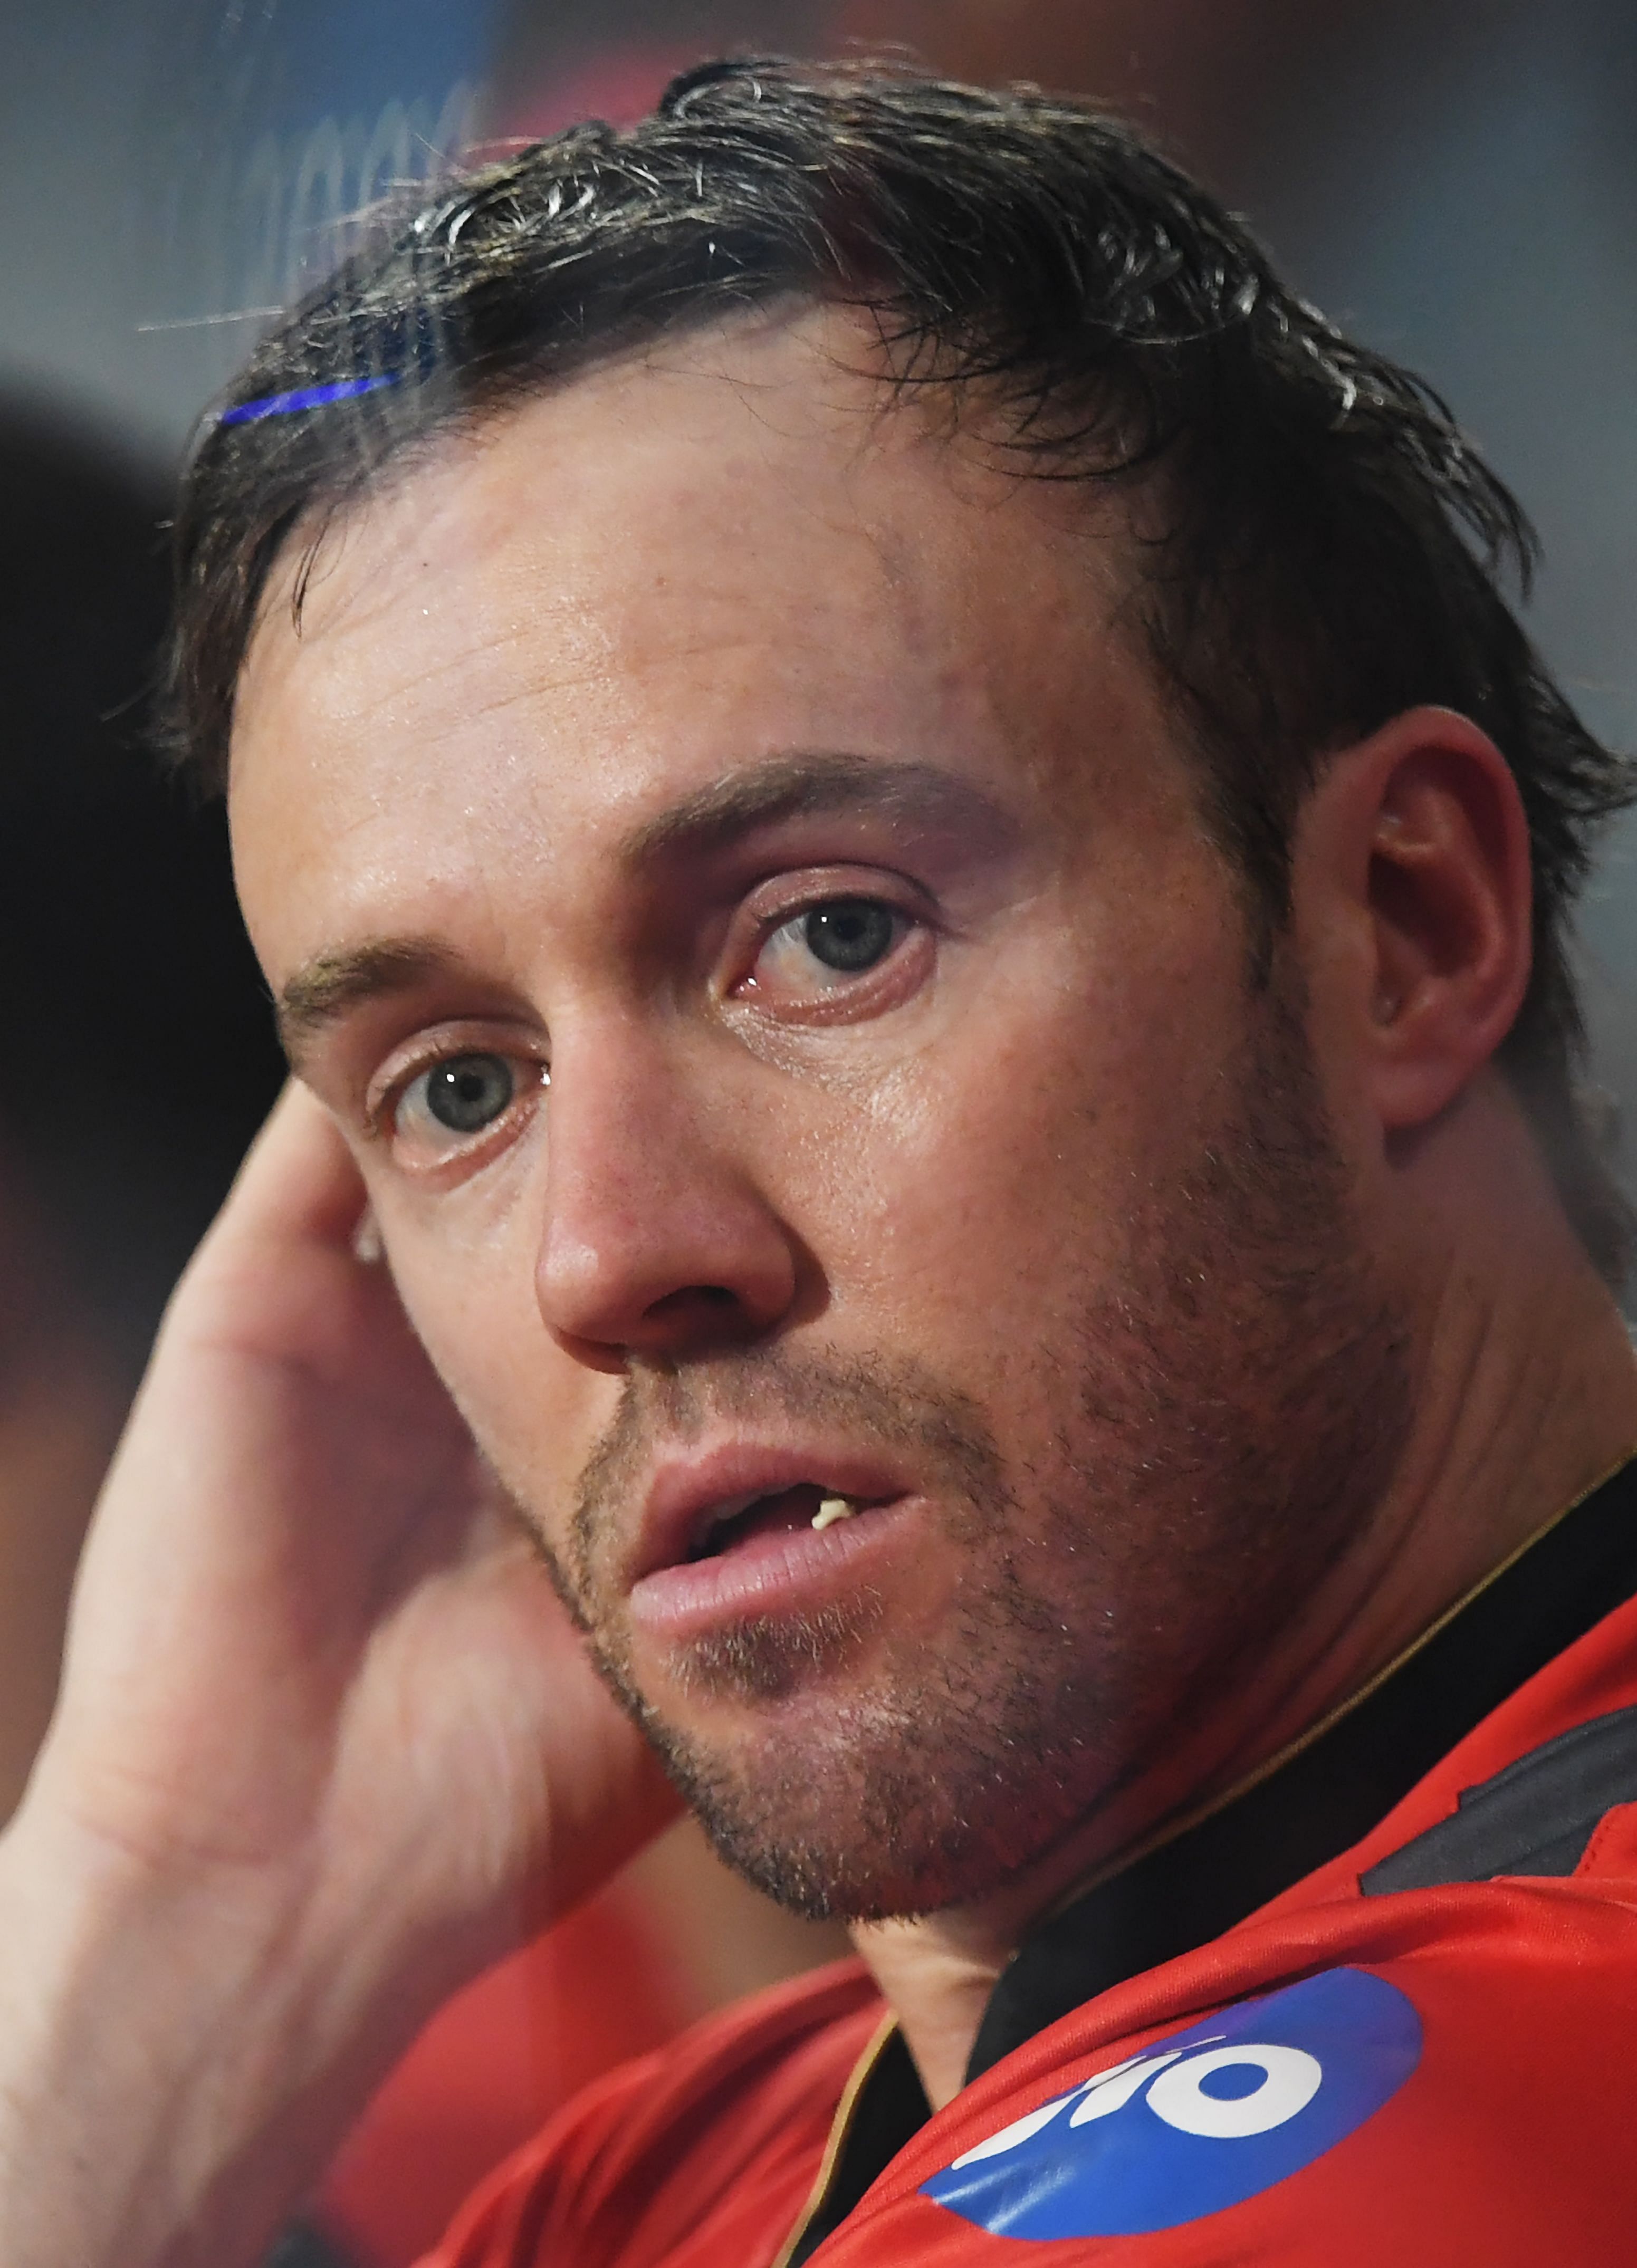  In this file photo taken on April 24, 2017 Royal Challengers Bangalore cricketer AB de Villiers reacts during the 2017 Indian Premier League (IPL) Twenty20 cricket match between Kolkata Knight Riders and Royal Challengers Bangalore. (AFP Photo)